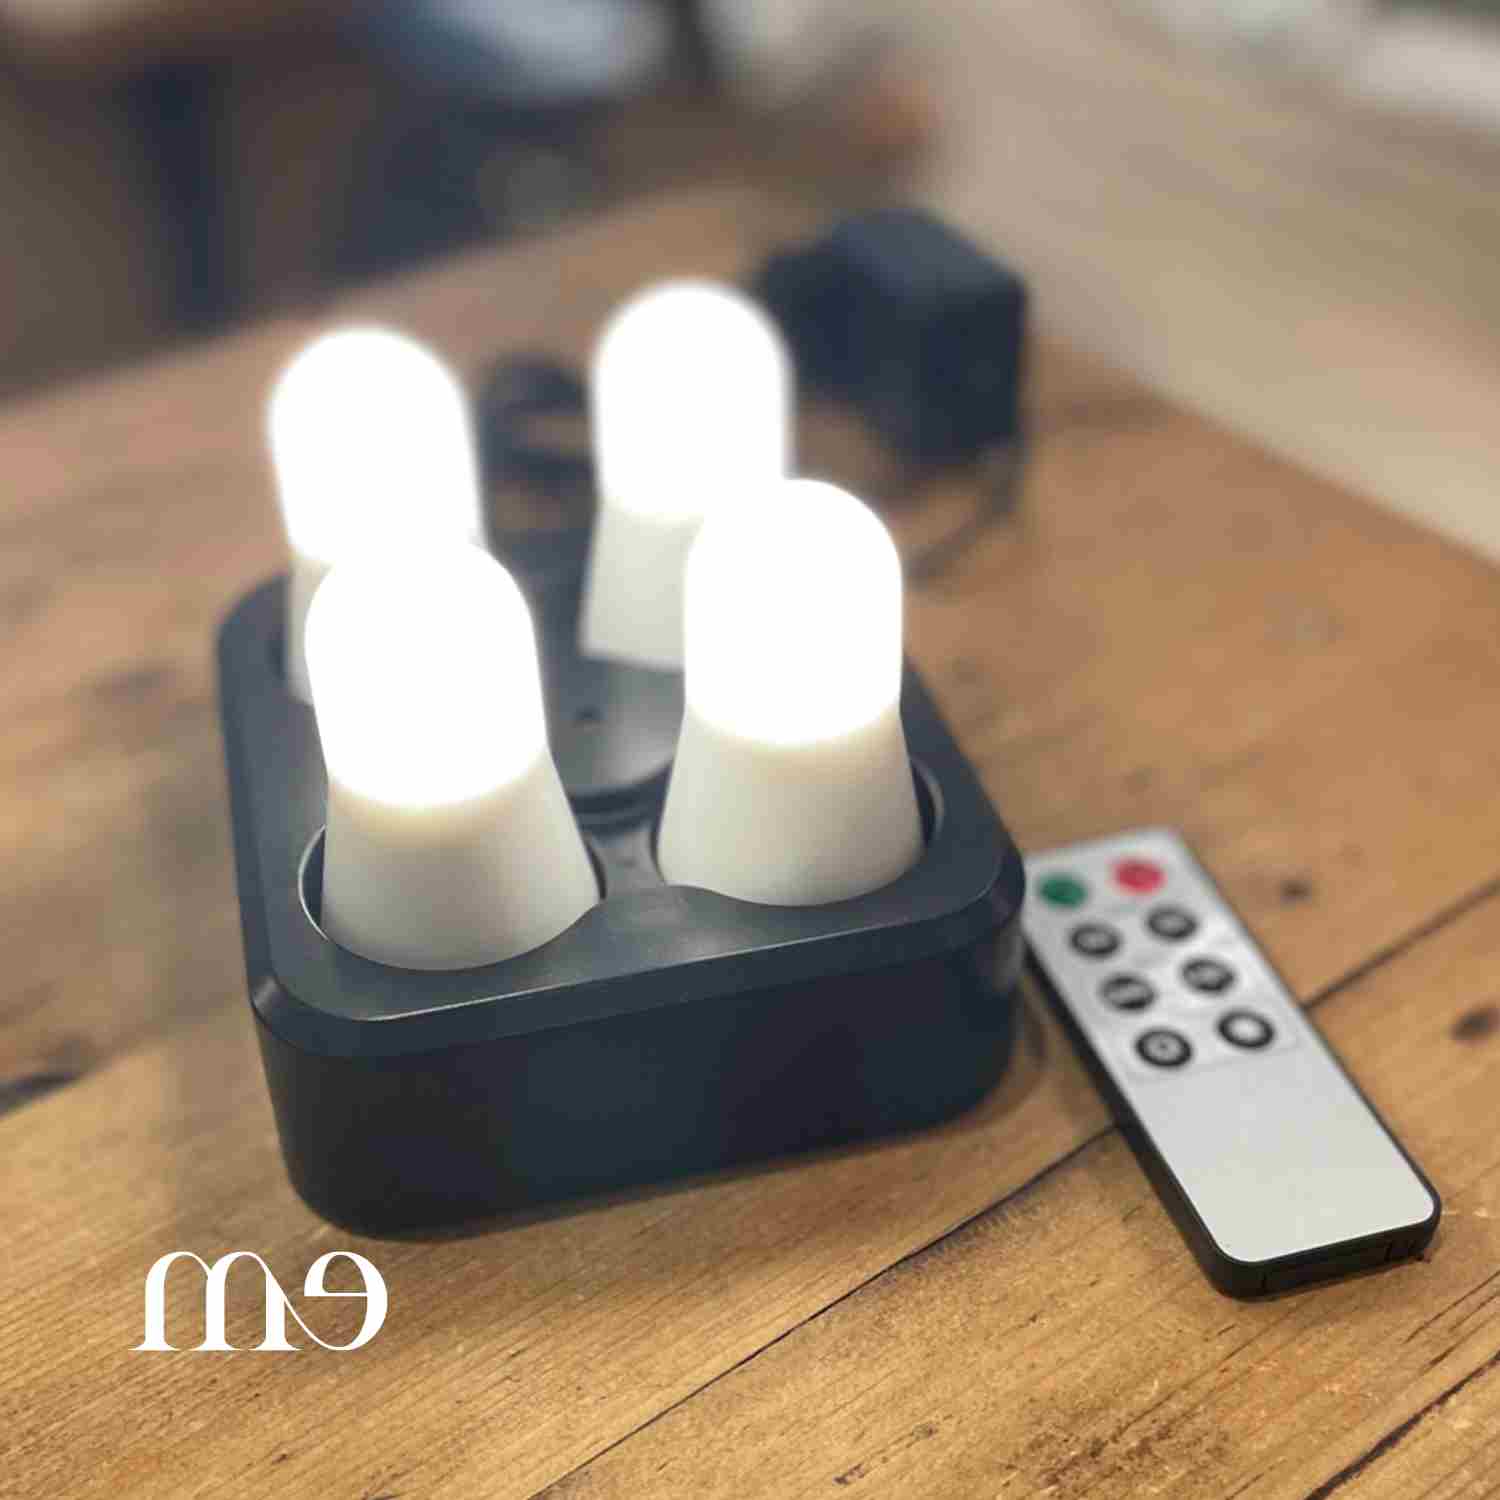 Bougies LED rechargeable